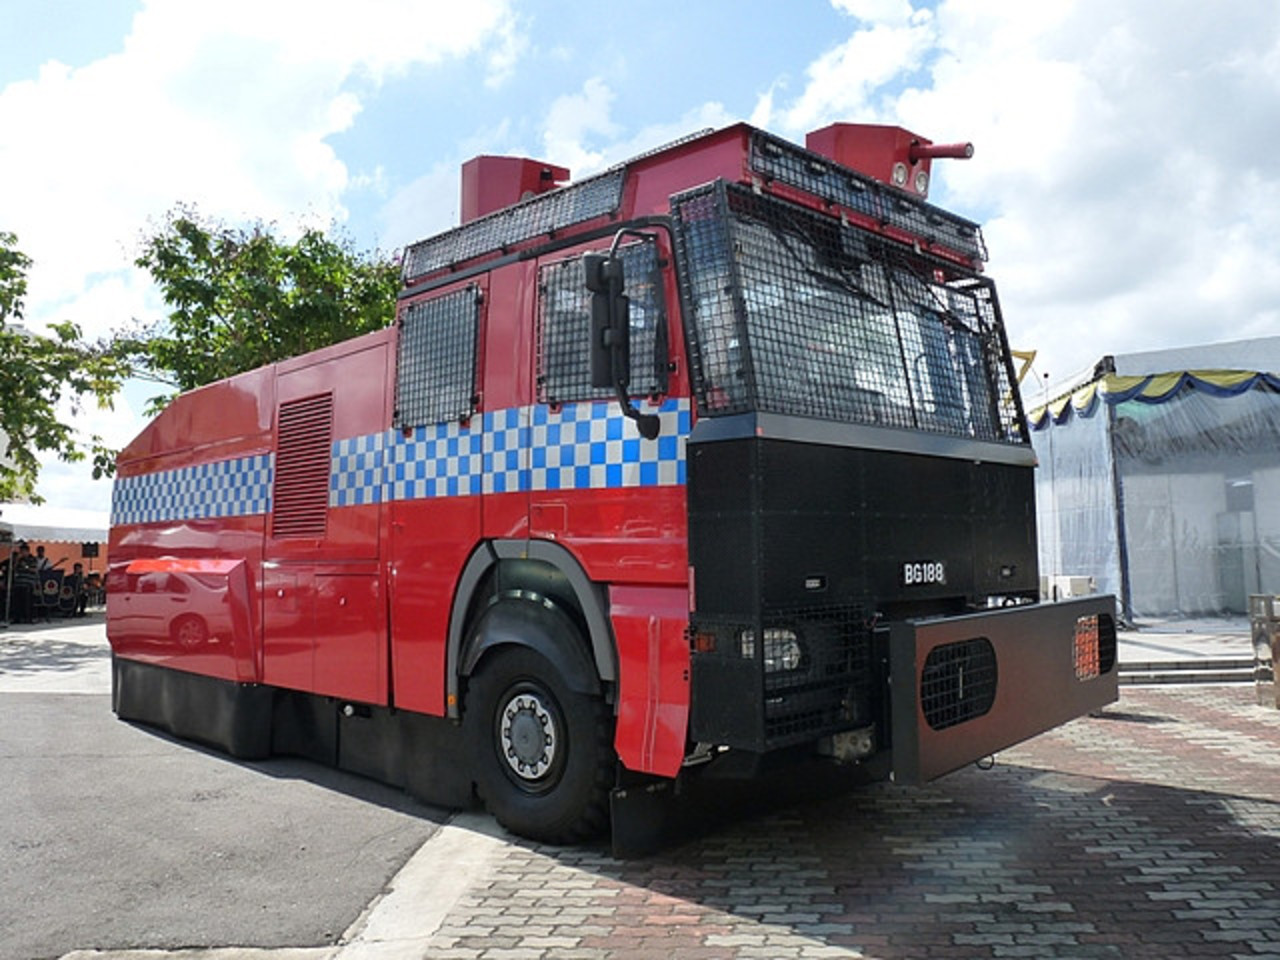 Wasserwerfer / Water Cannons (1) - a gallery on Flickr